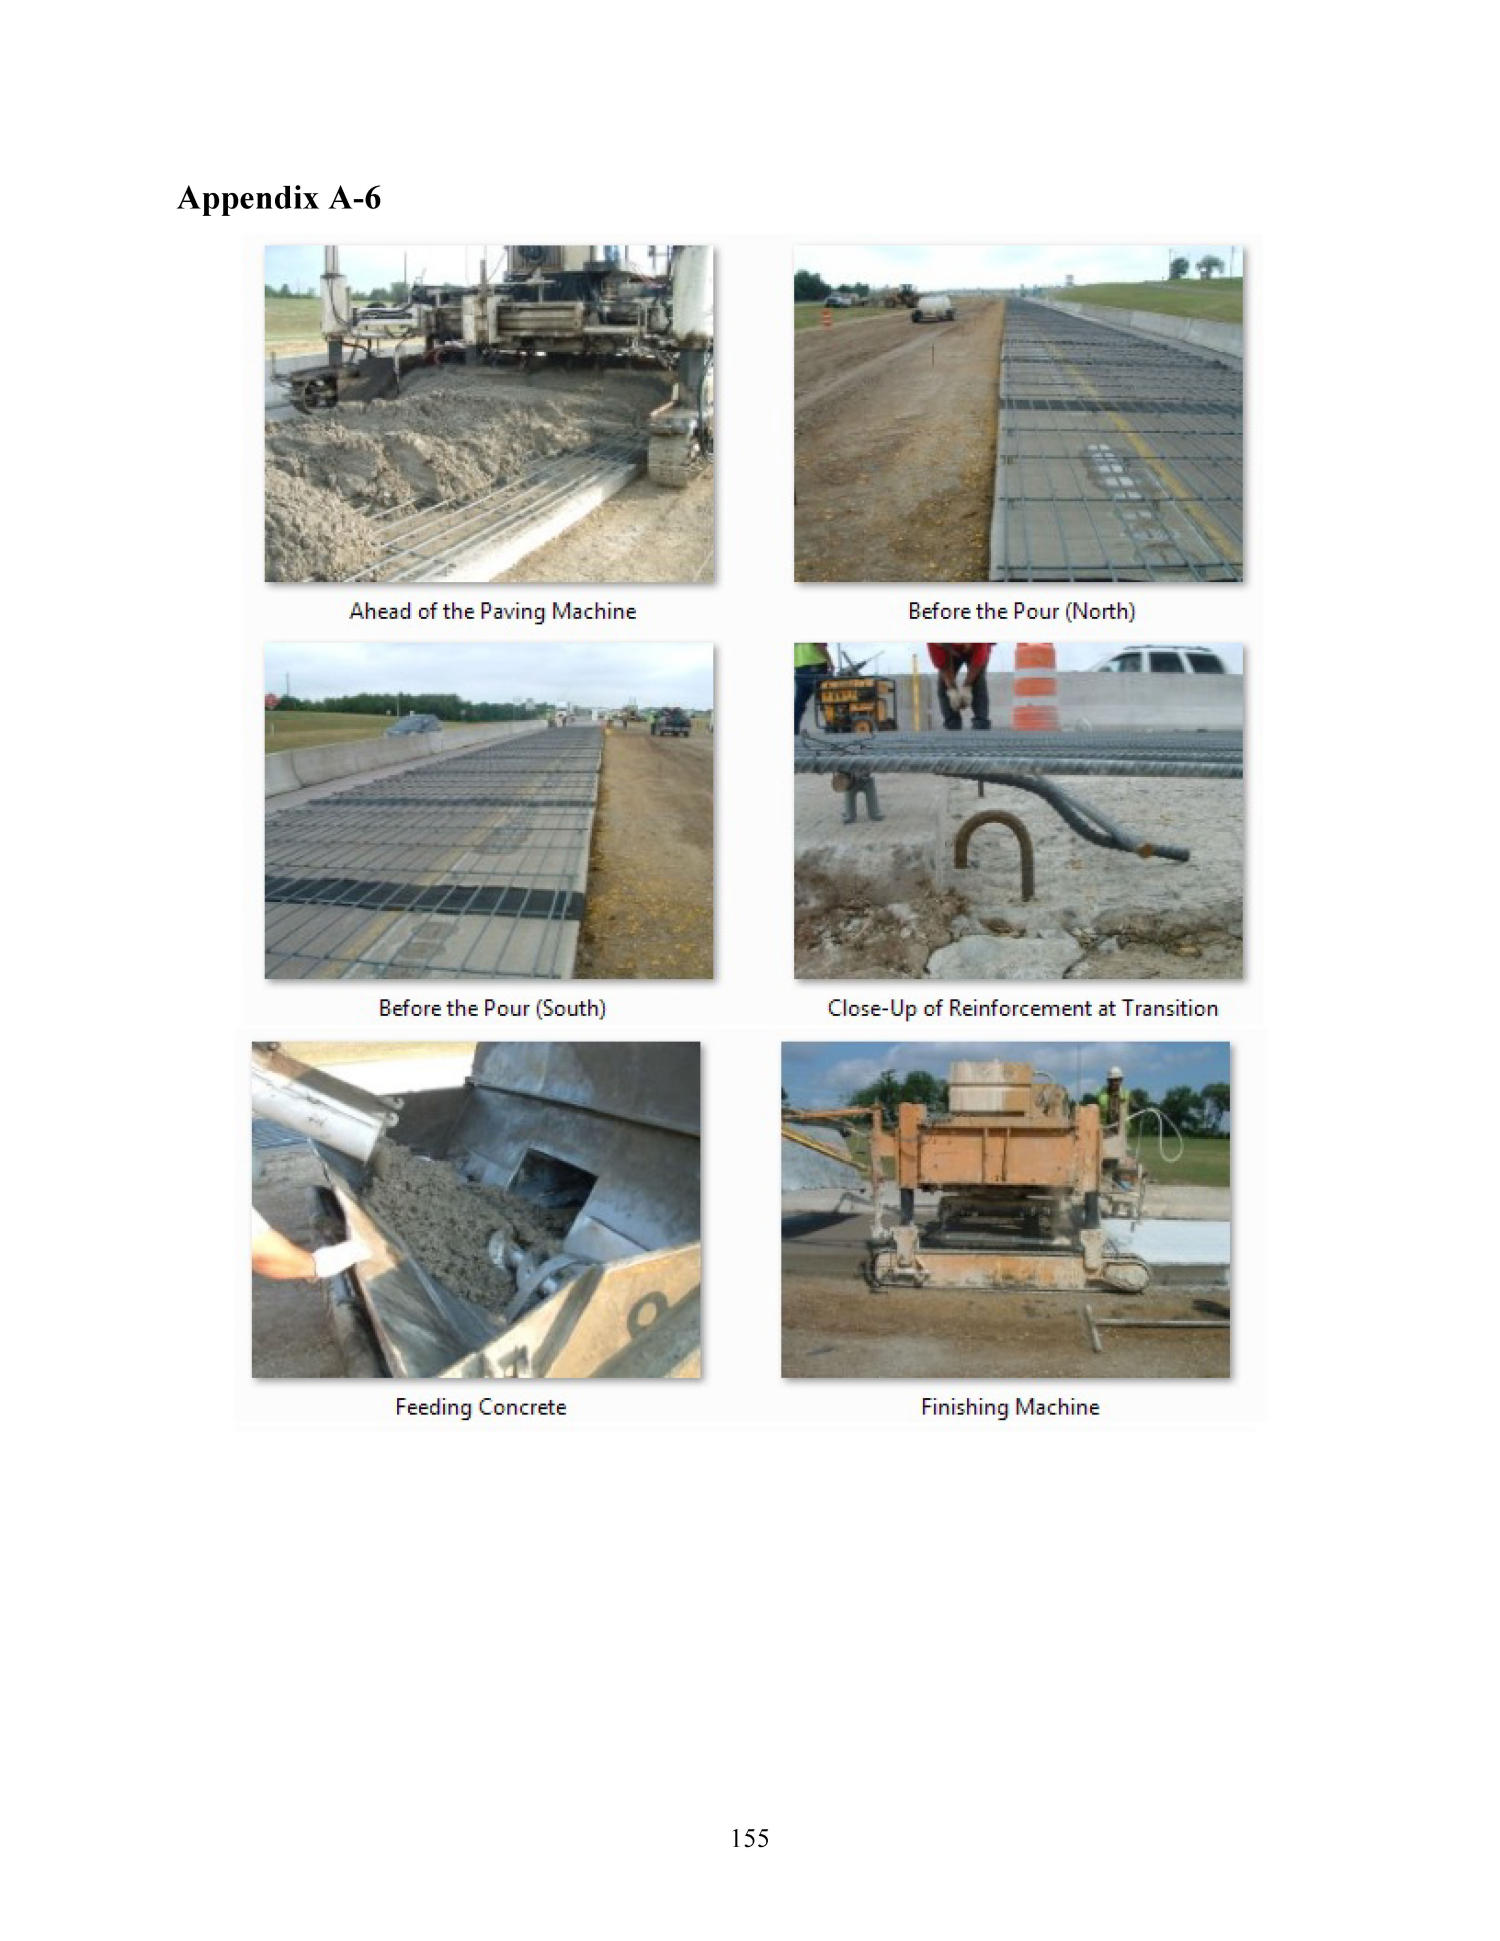 Materials selection for concrete overlays : the final report
                                                
                                                    155
                                                